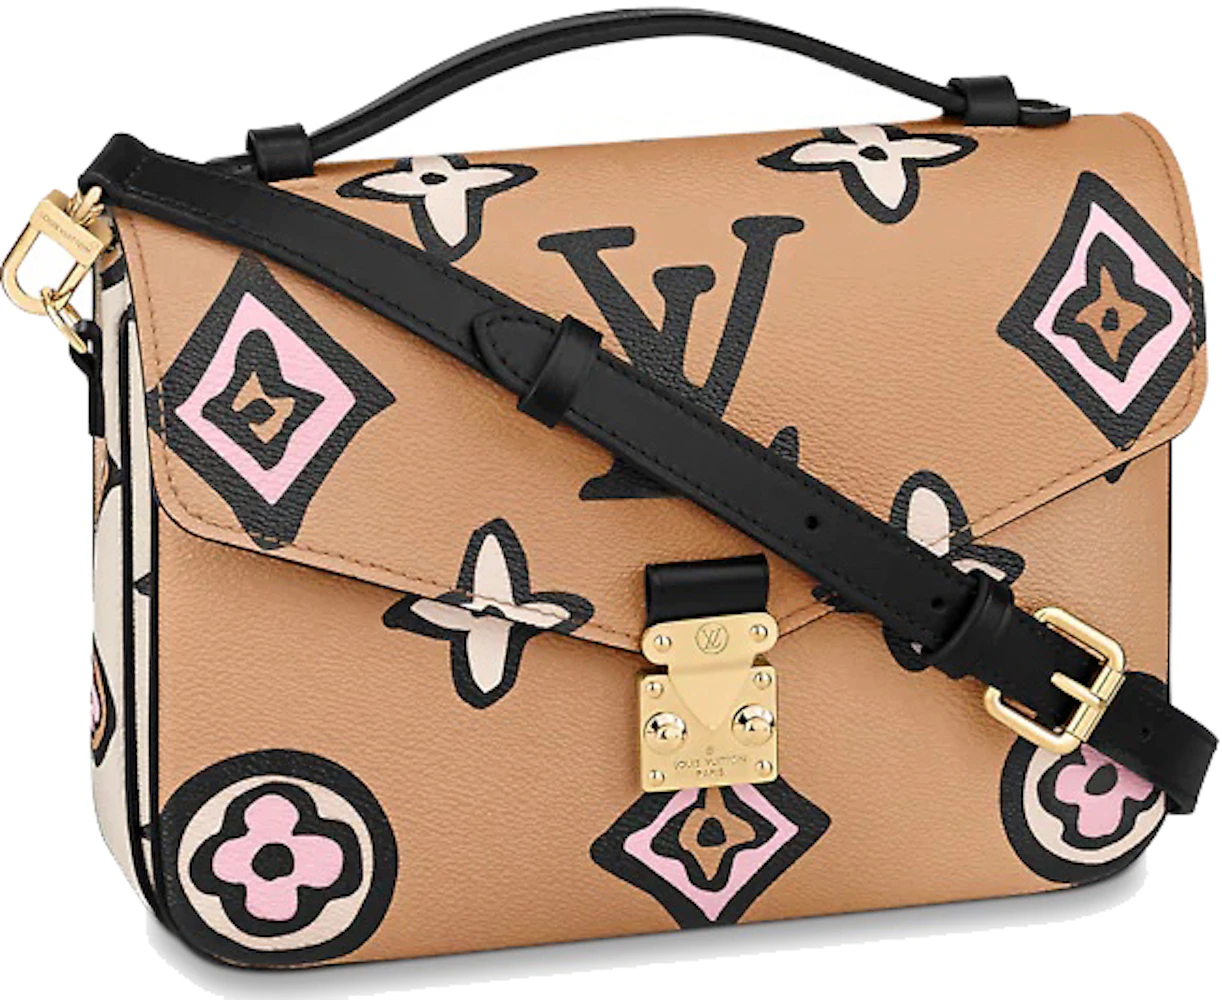 New In: Louis Vuitton Pochette Metis - The Lovecats Inc